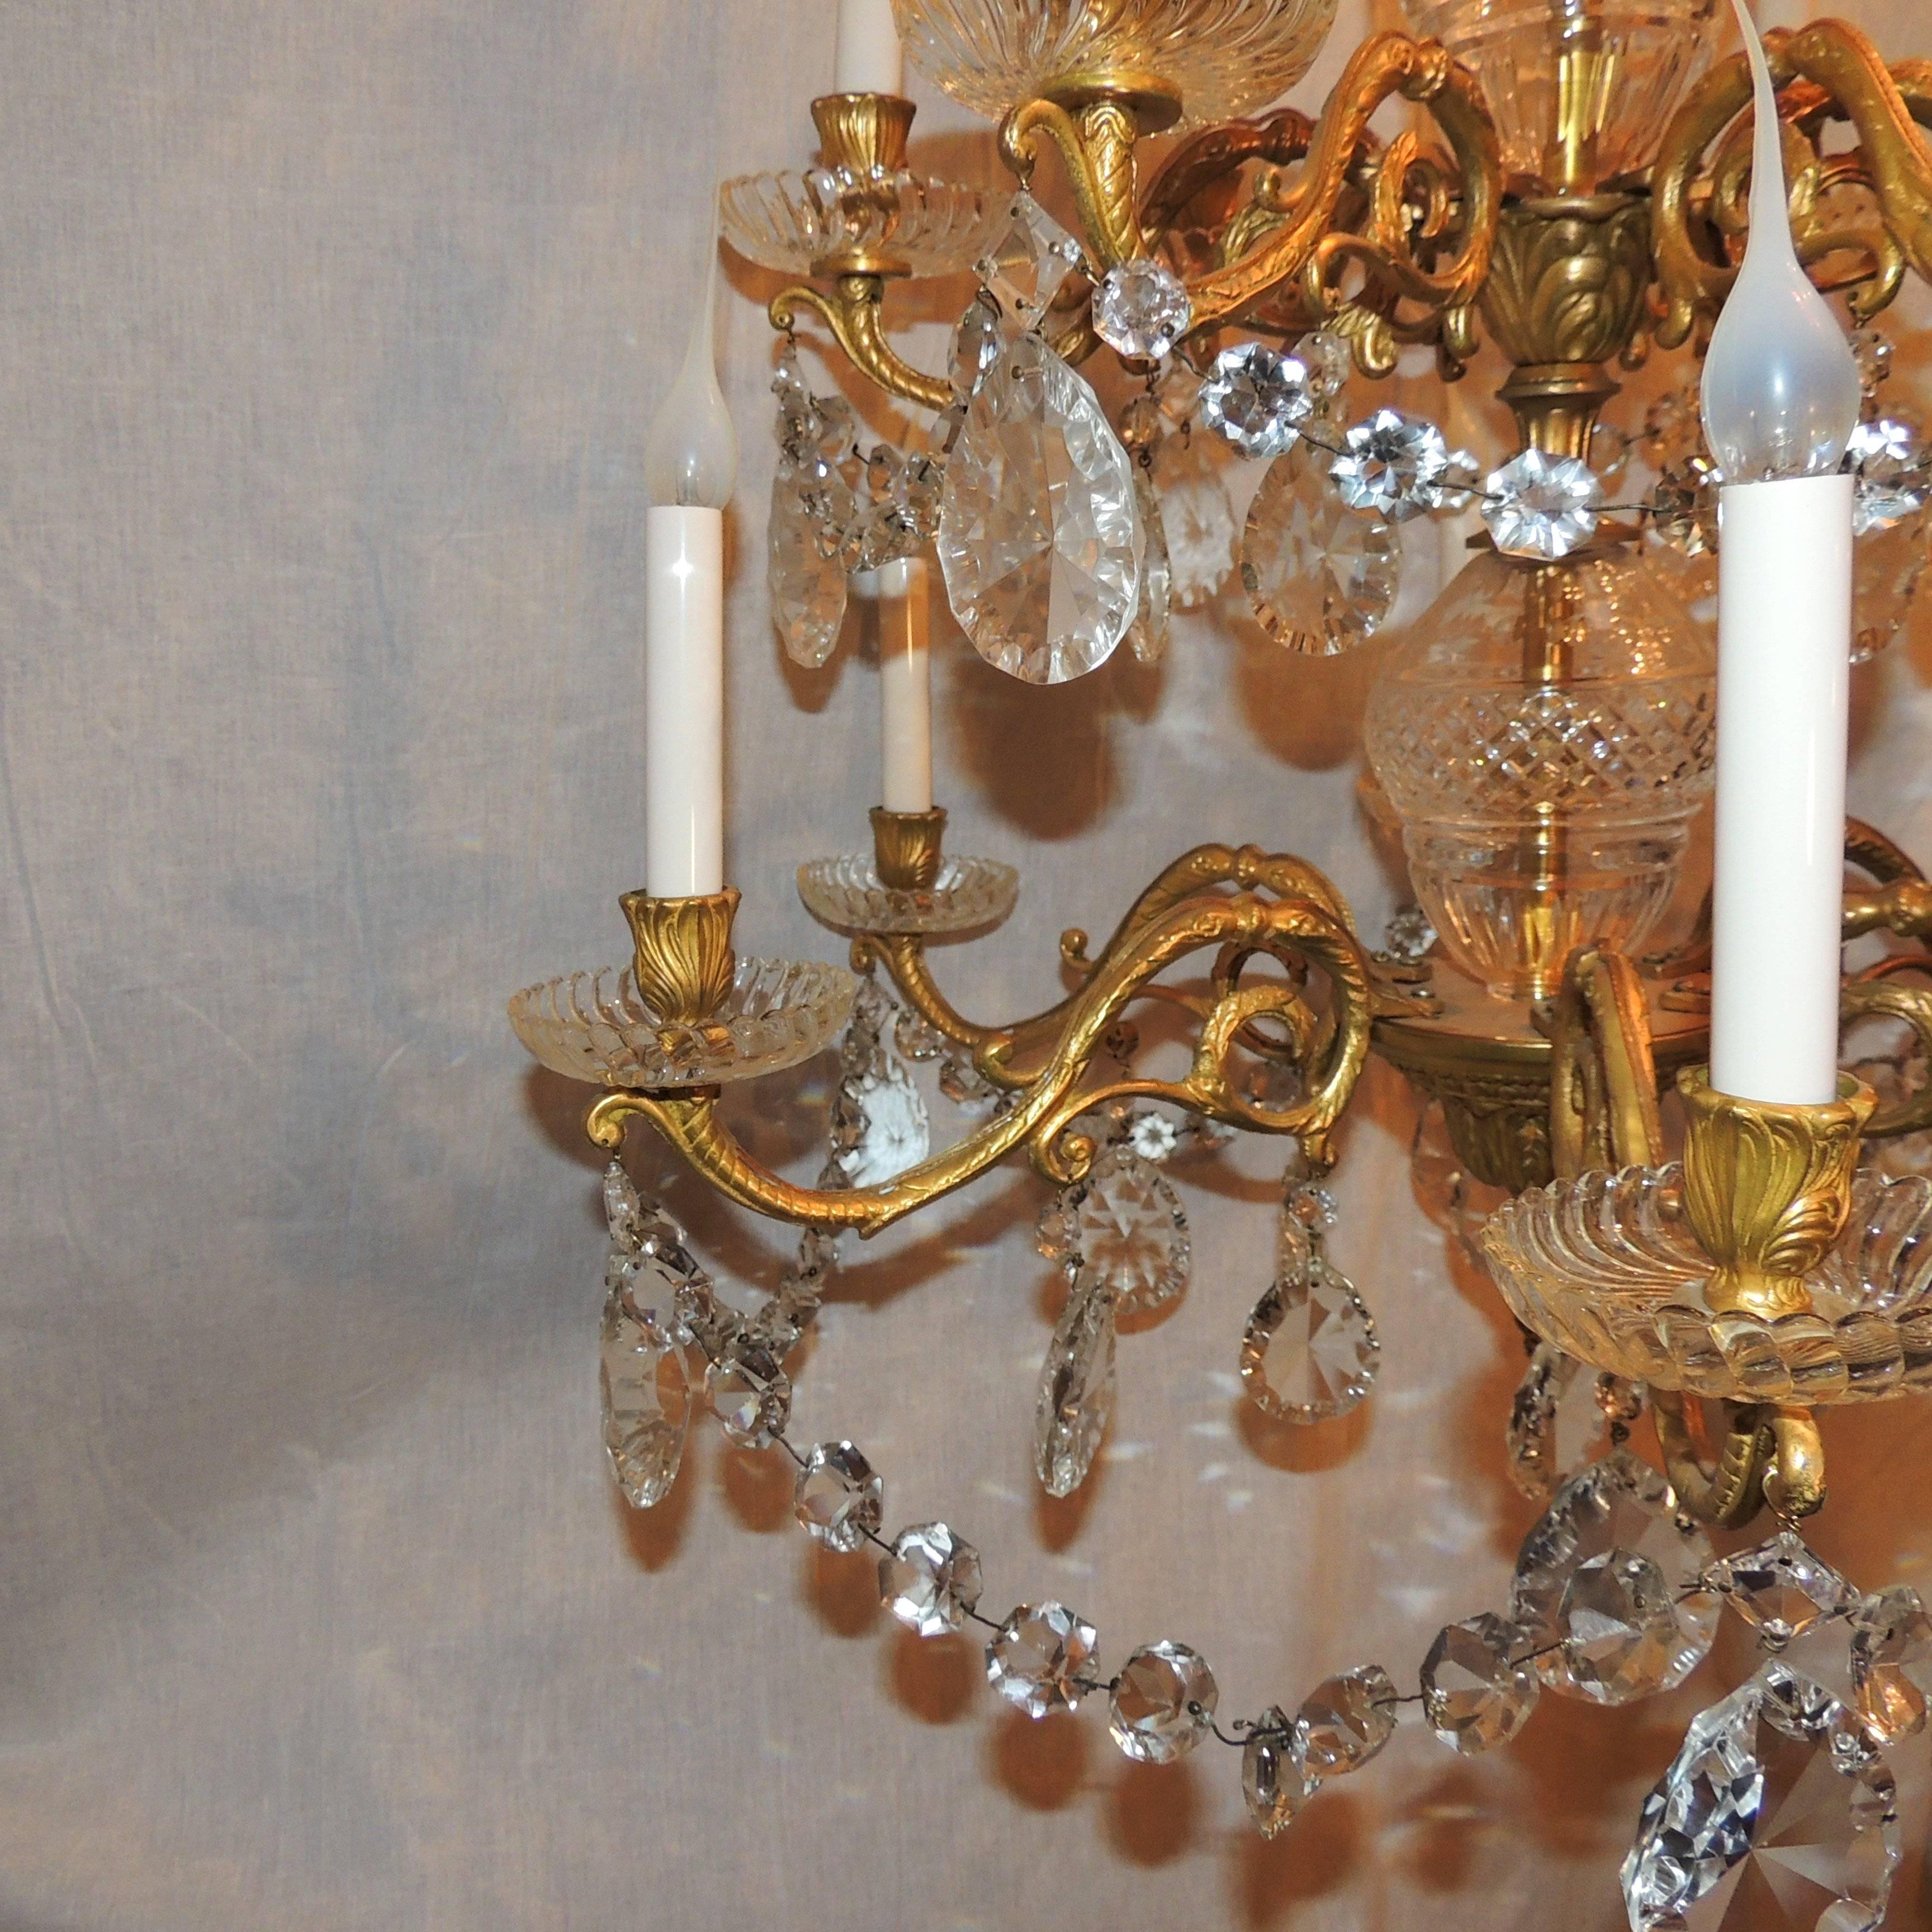 Mid-20th Century French Three-Tier 12-Arm Cut Crystal Dore Bronze Chandelier Floral Fixture For Sale